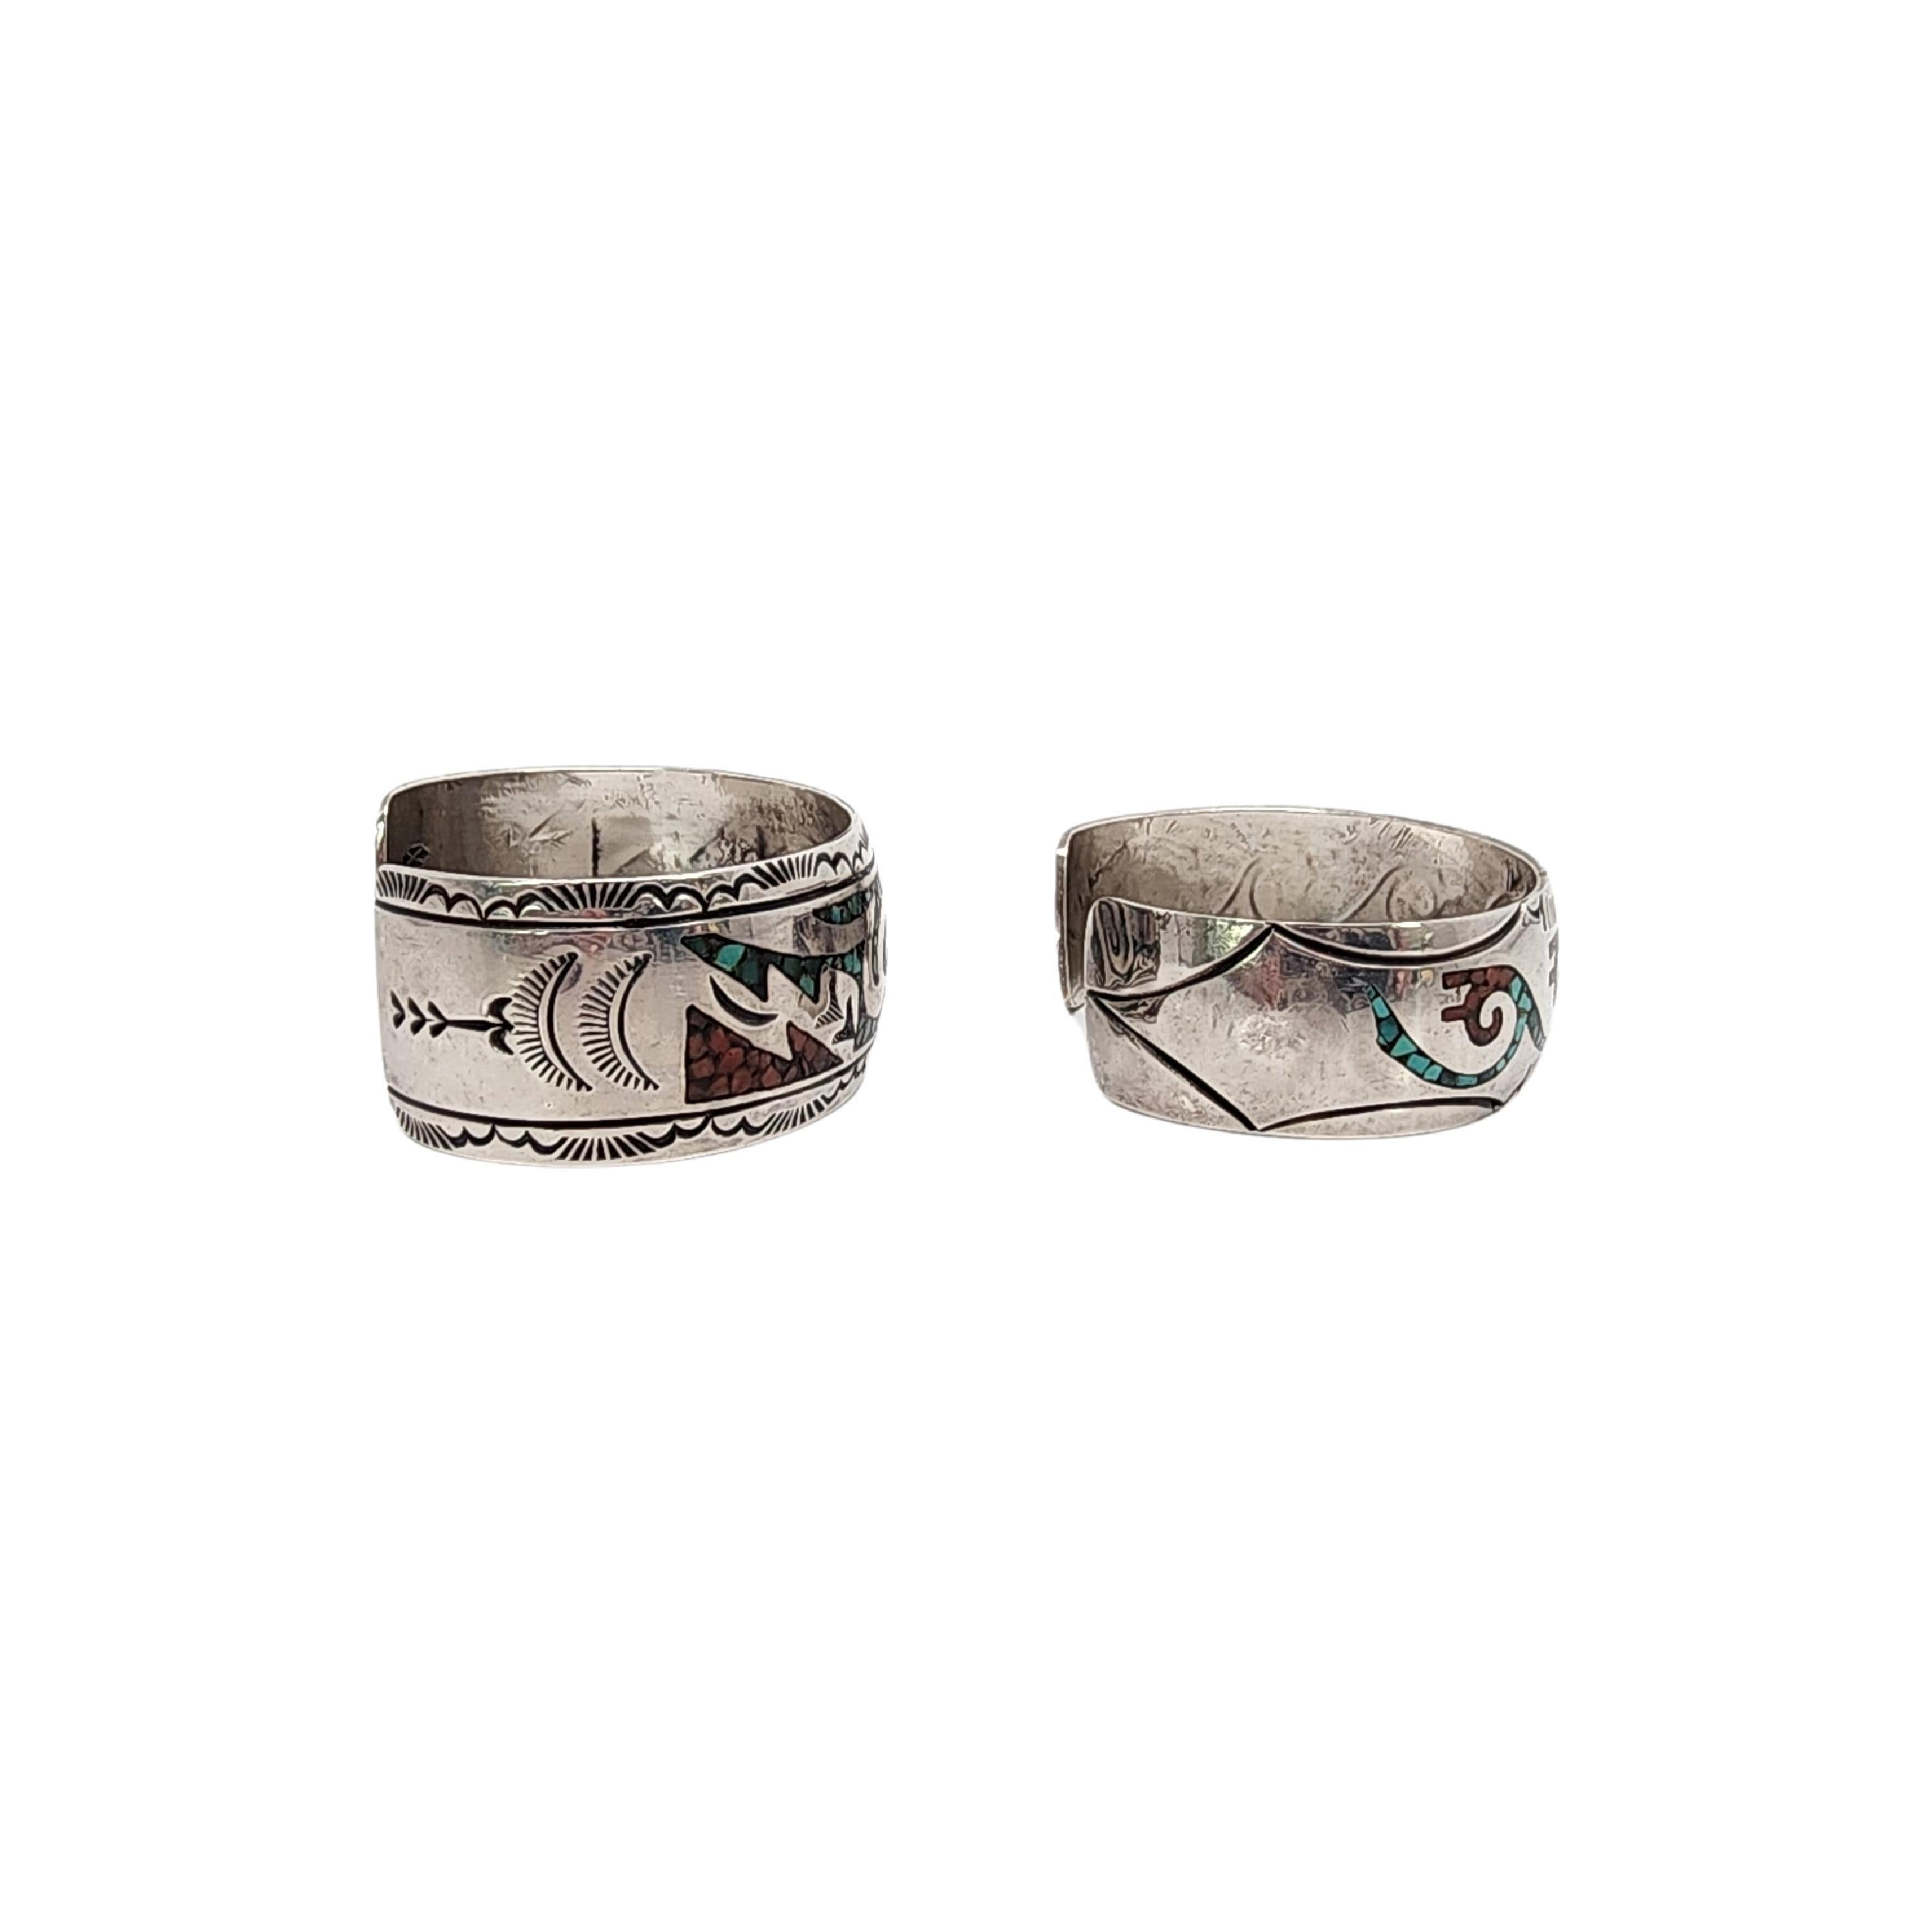 Cabochon Set of 2 Native American Crushed Turquoise Silver Cuff Bracelets #15358 For Sale